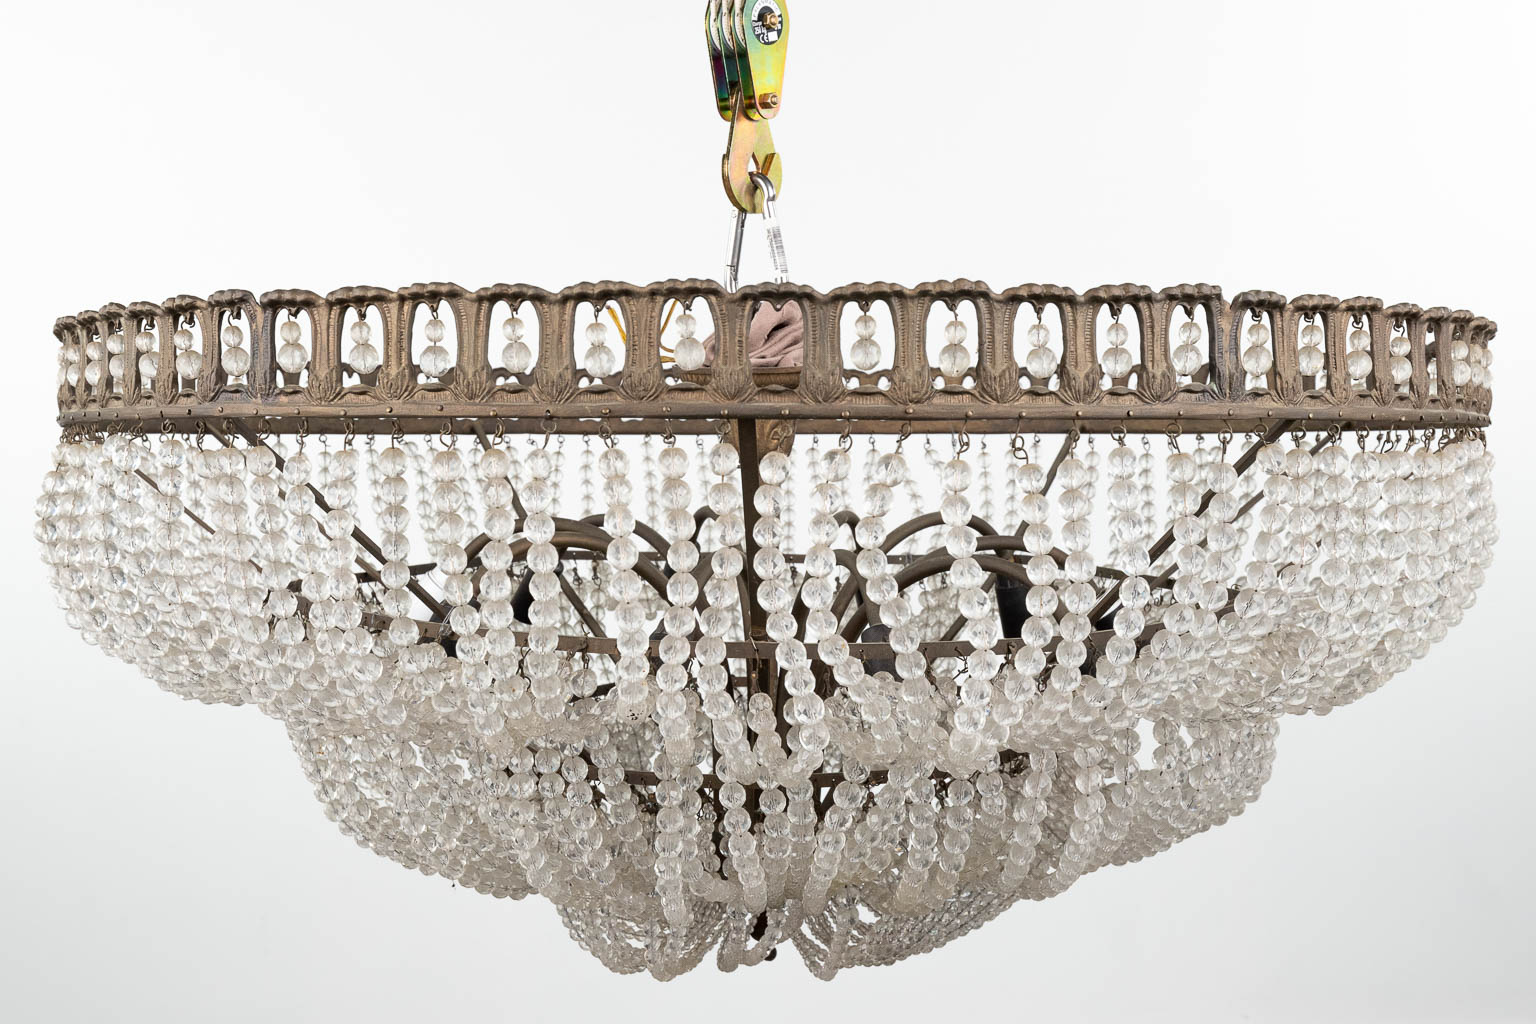 A large chandelier 